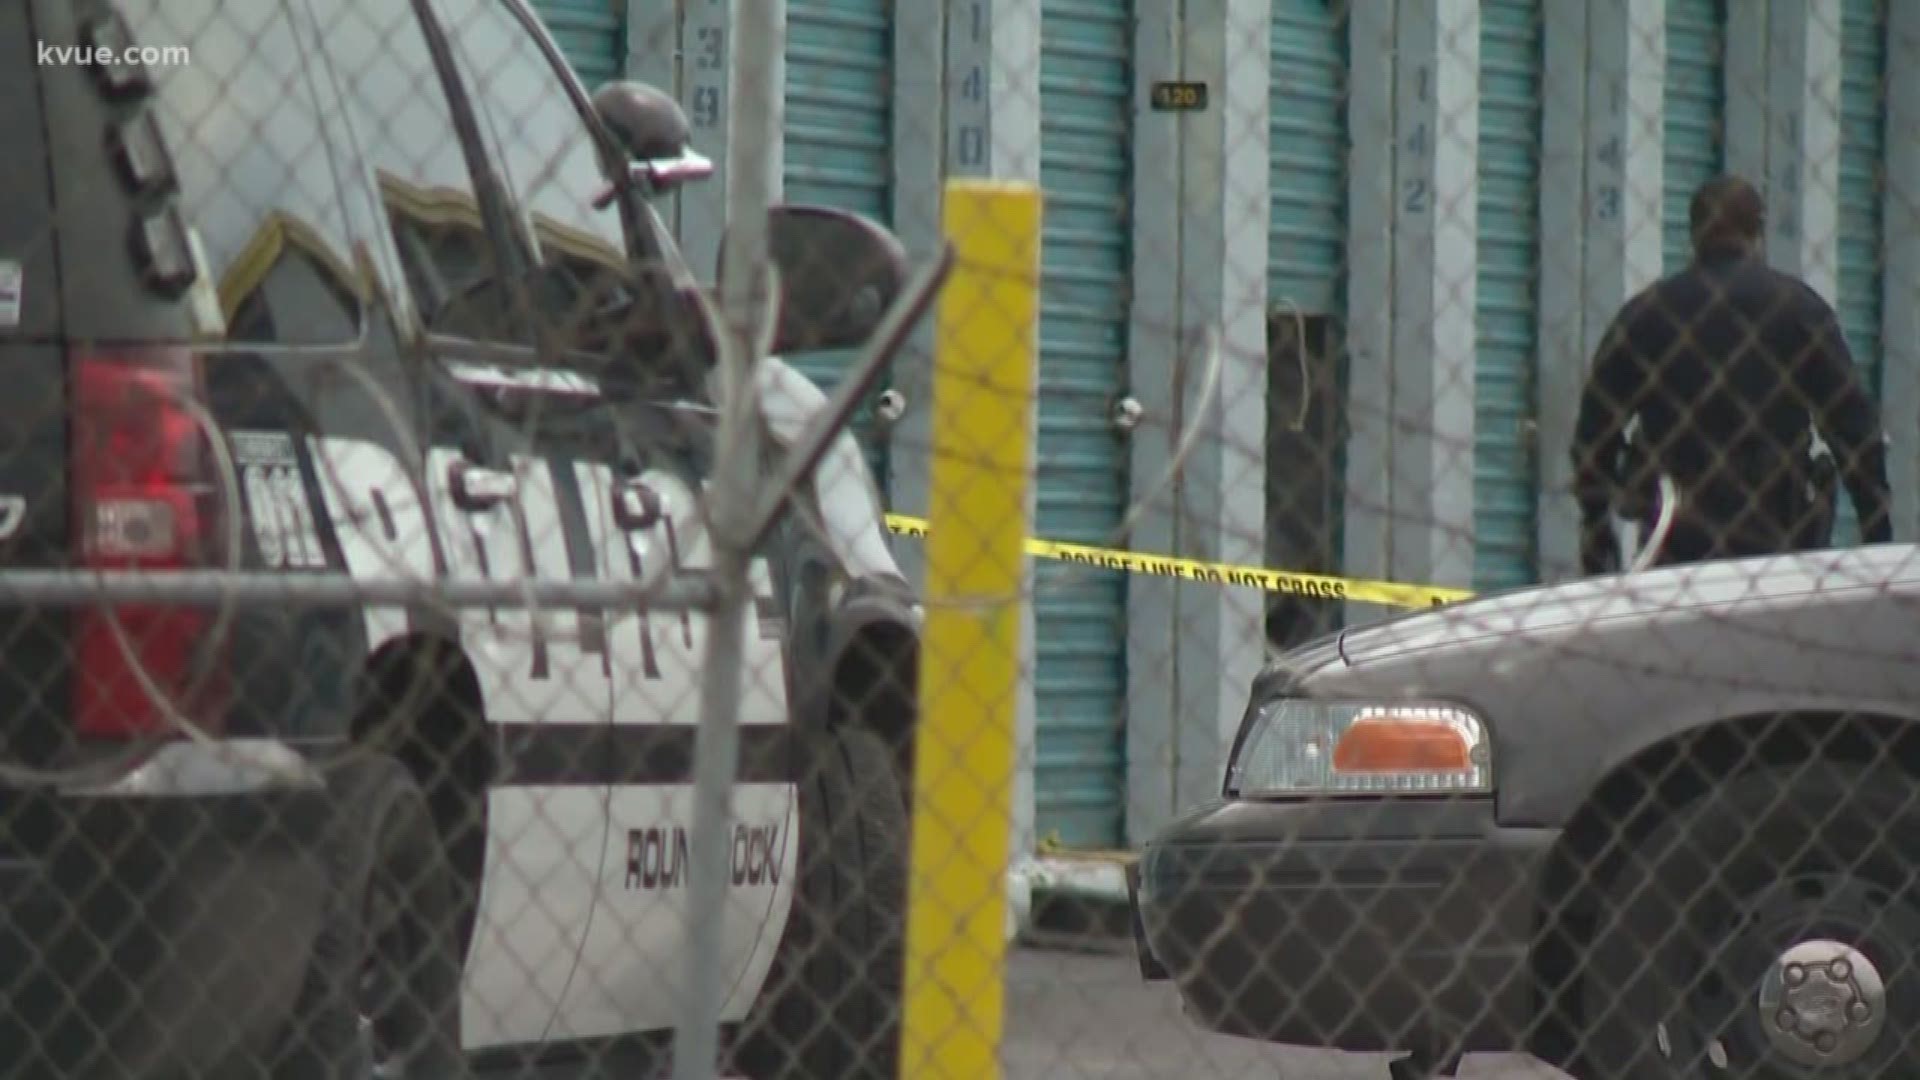 A woman was found dead in a Round Rock storage unit. Her estranged husband is accused of stabbing her.